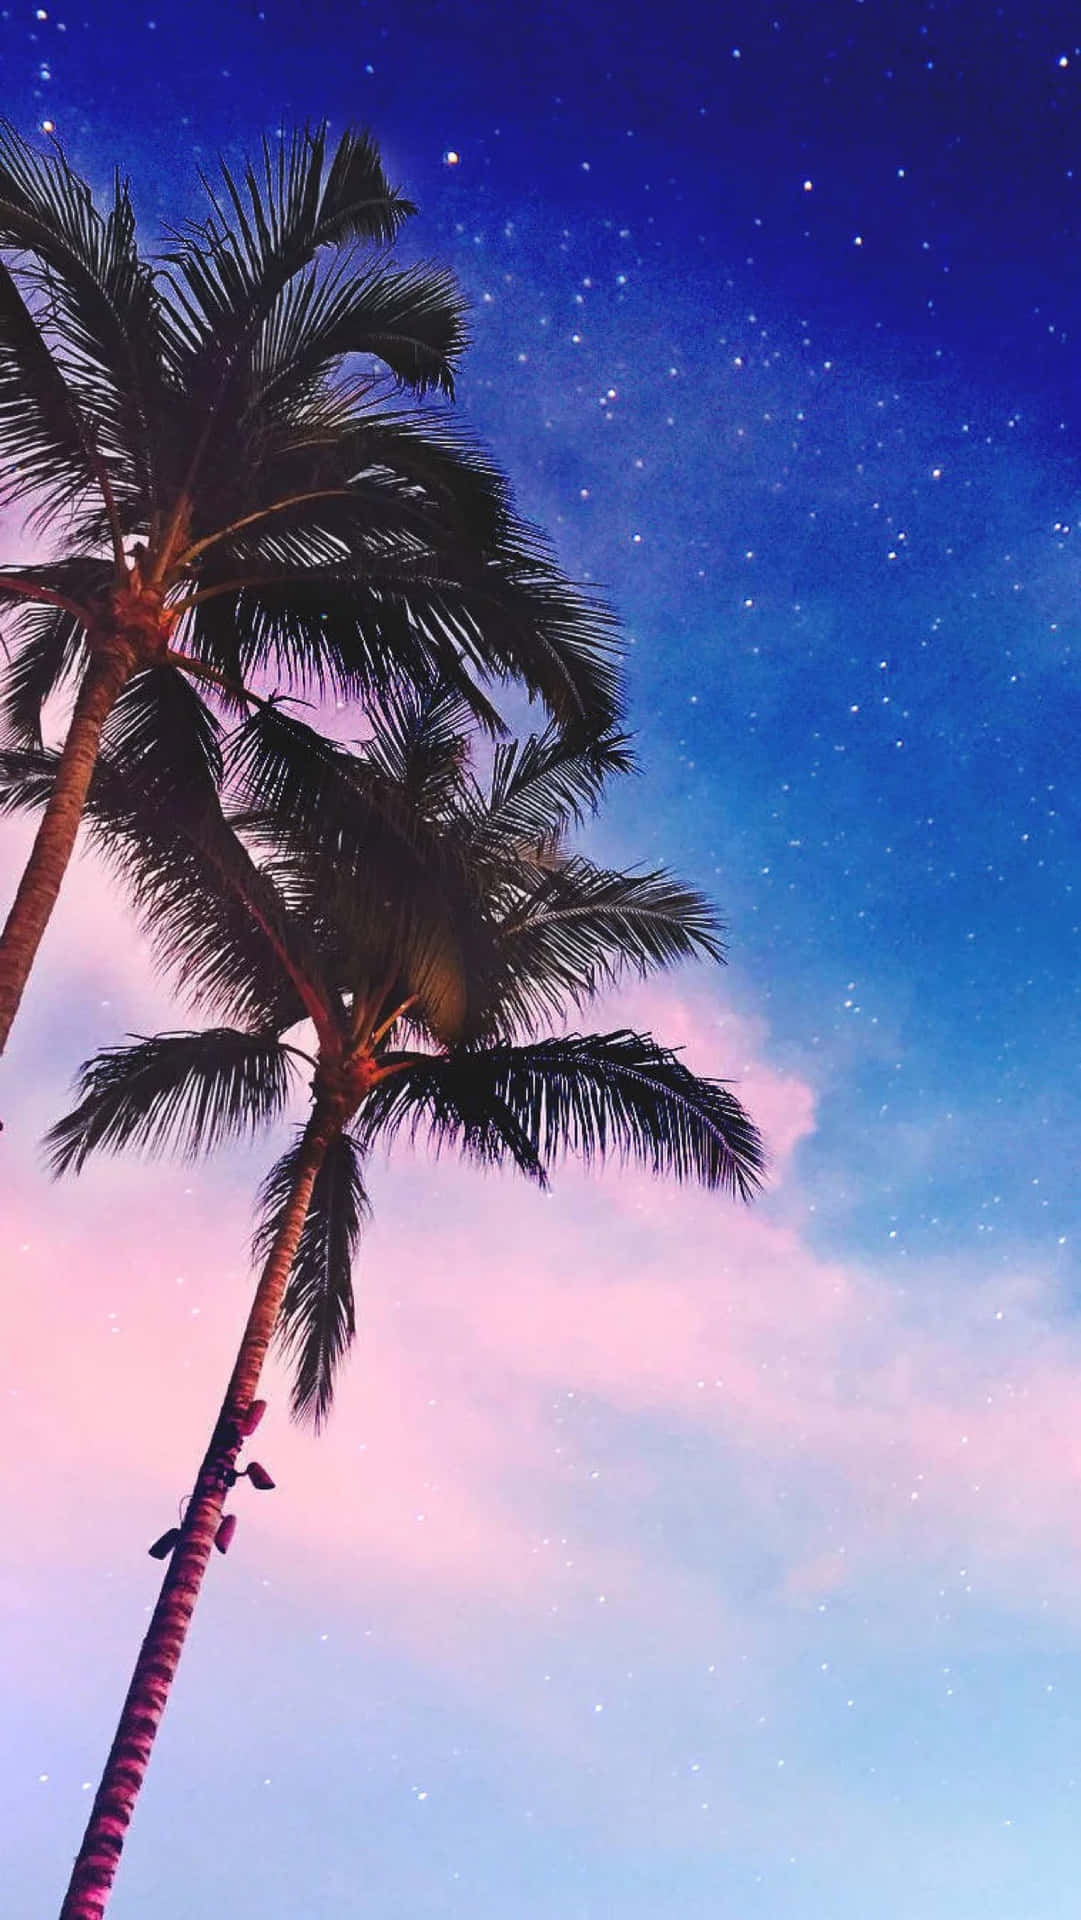 Night Sky With Palm Tree Iphone Wallpaper